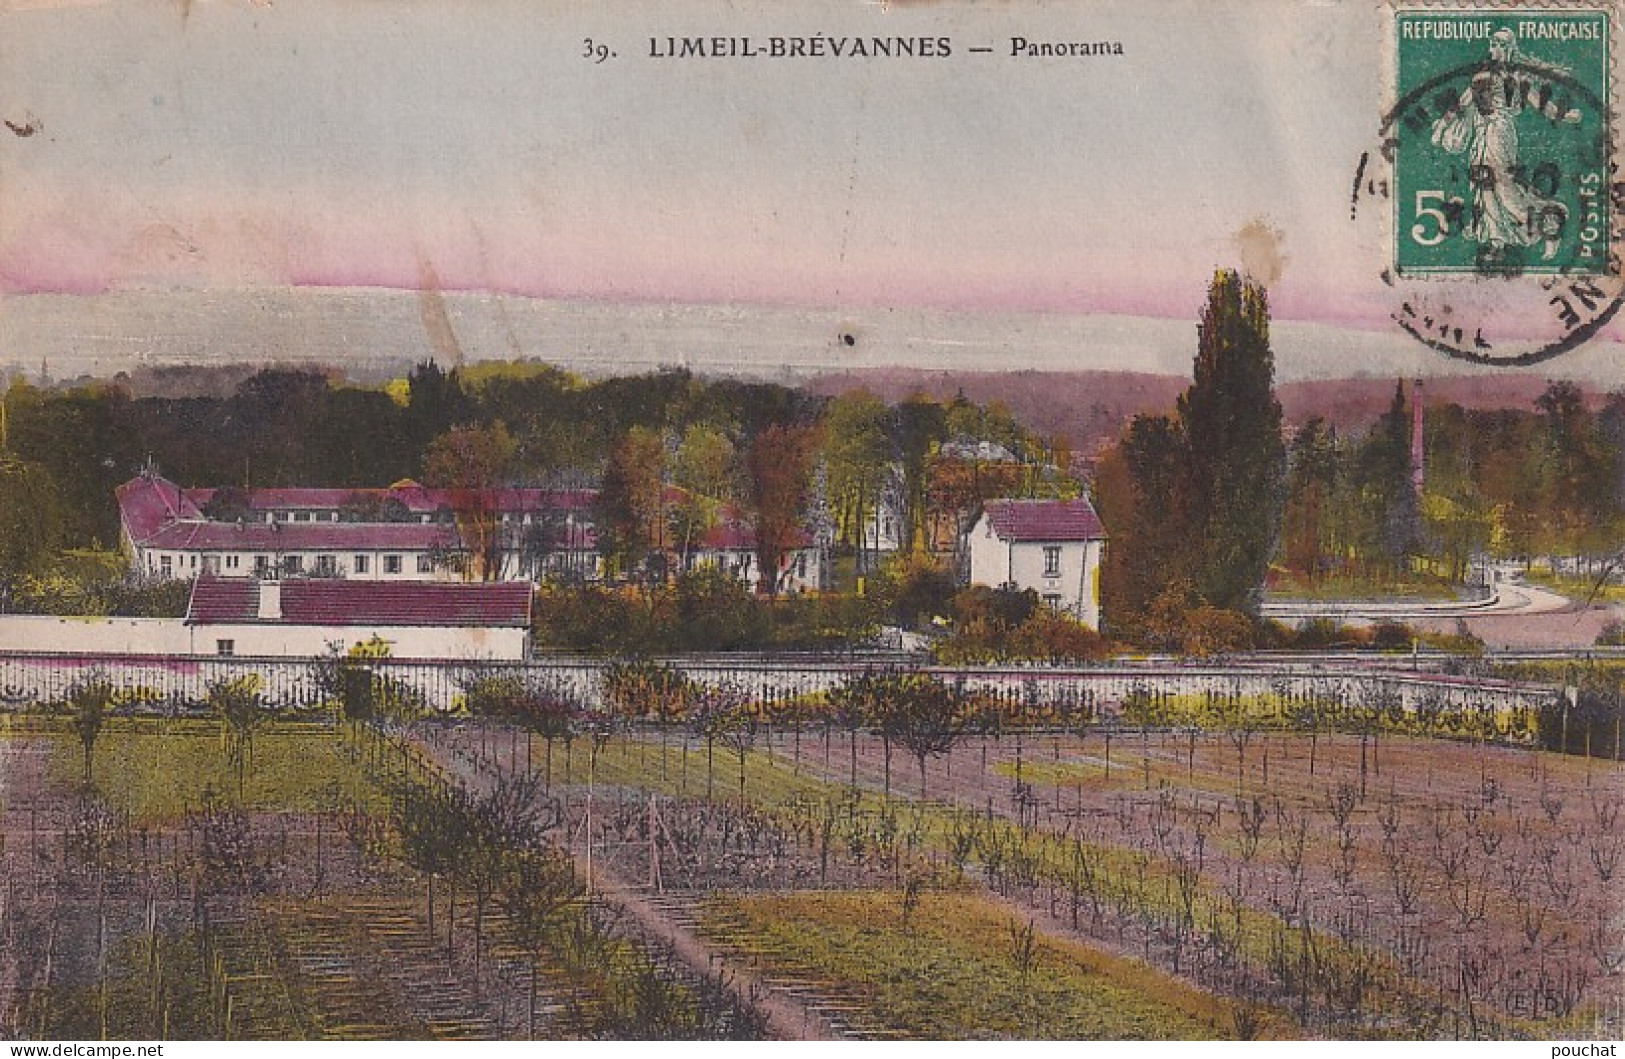 XXX Nw-(94) LIMEIL BREVANNES - PANORAMA - CARTE COLORISEE - Limeil Brevannes